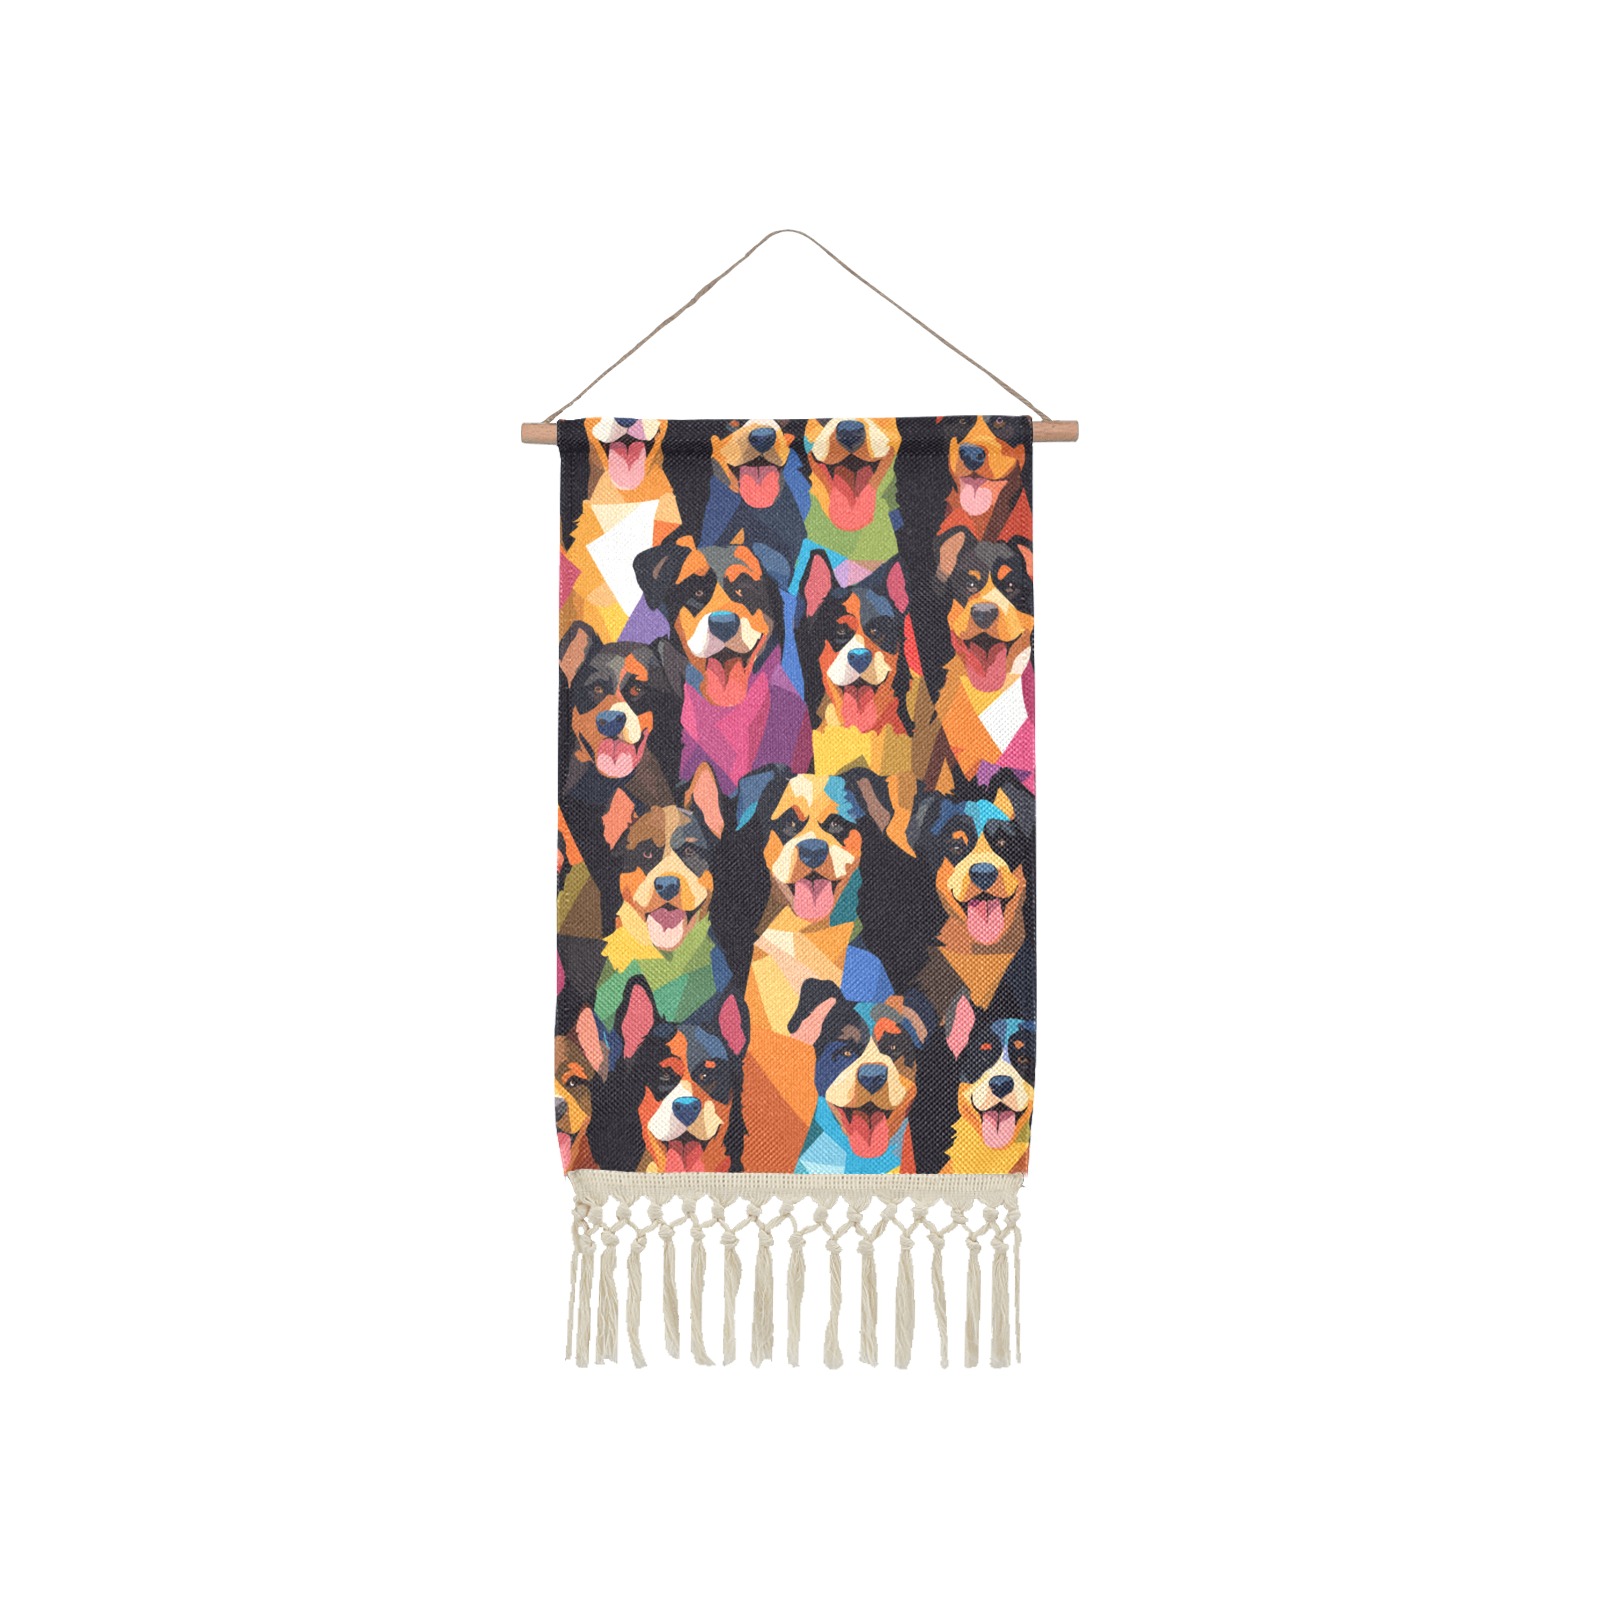 Colorful irregular pattern of funny adorable dogs. Linen Hanging Poster